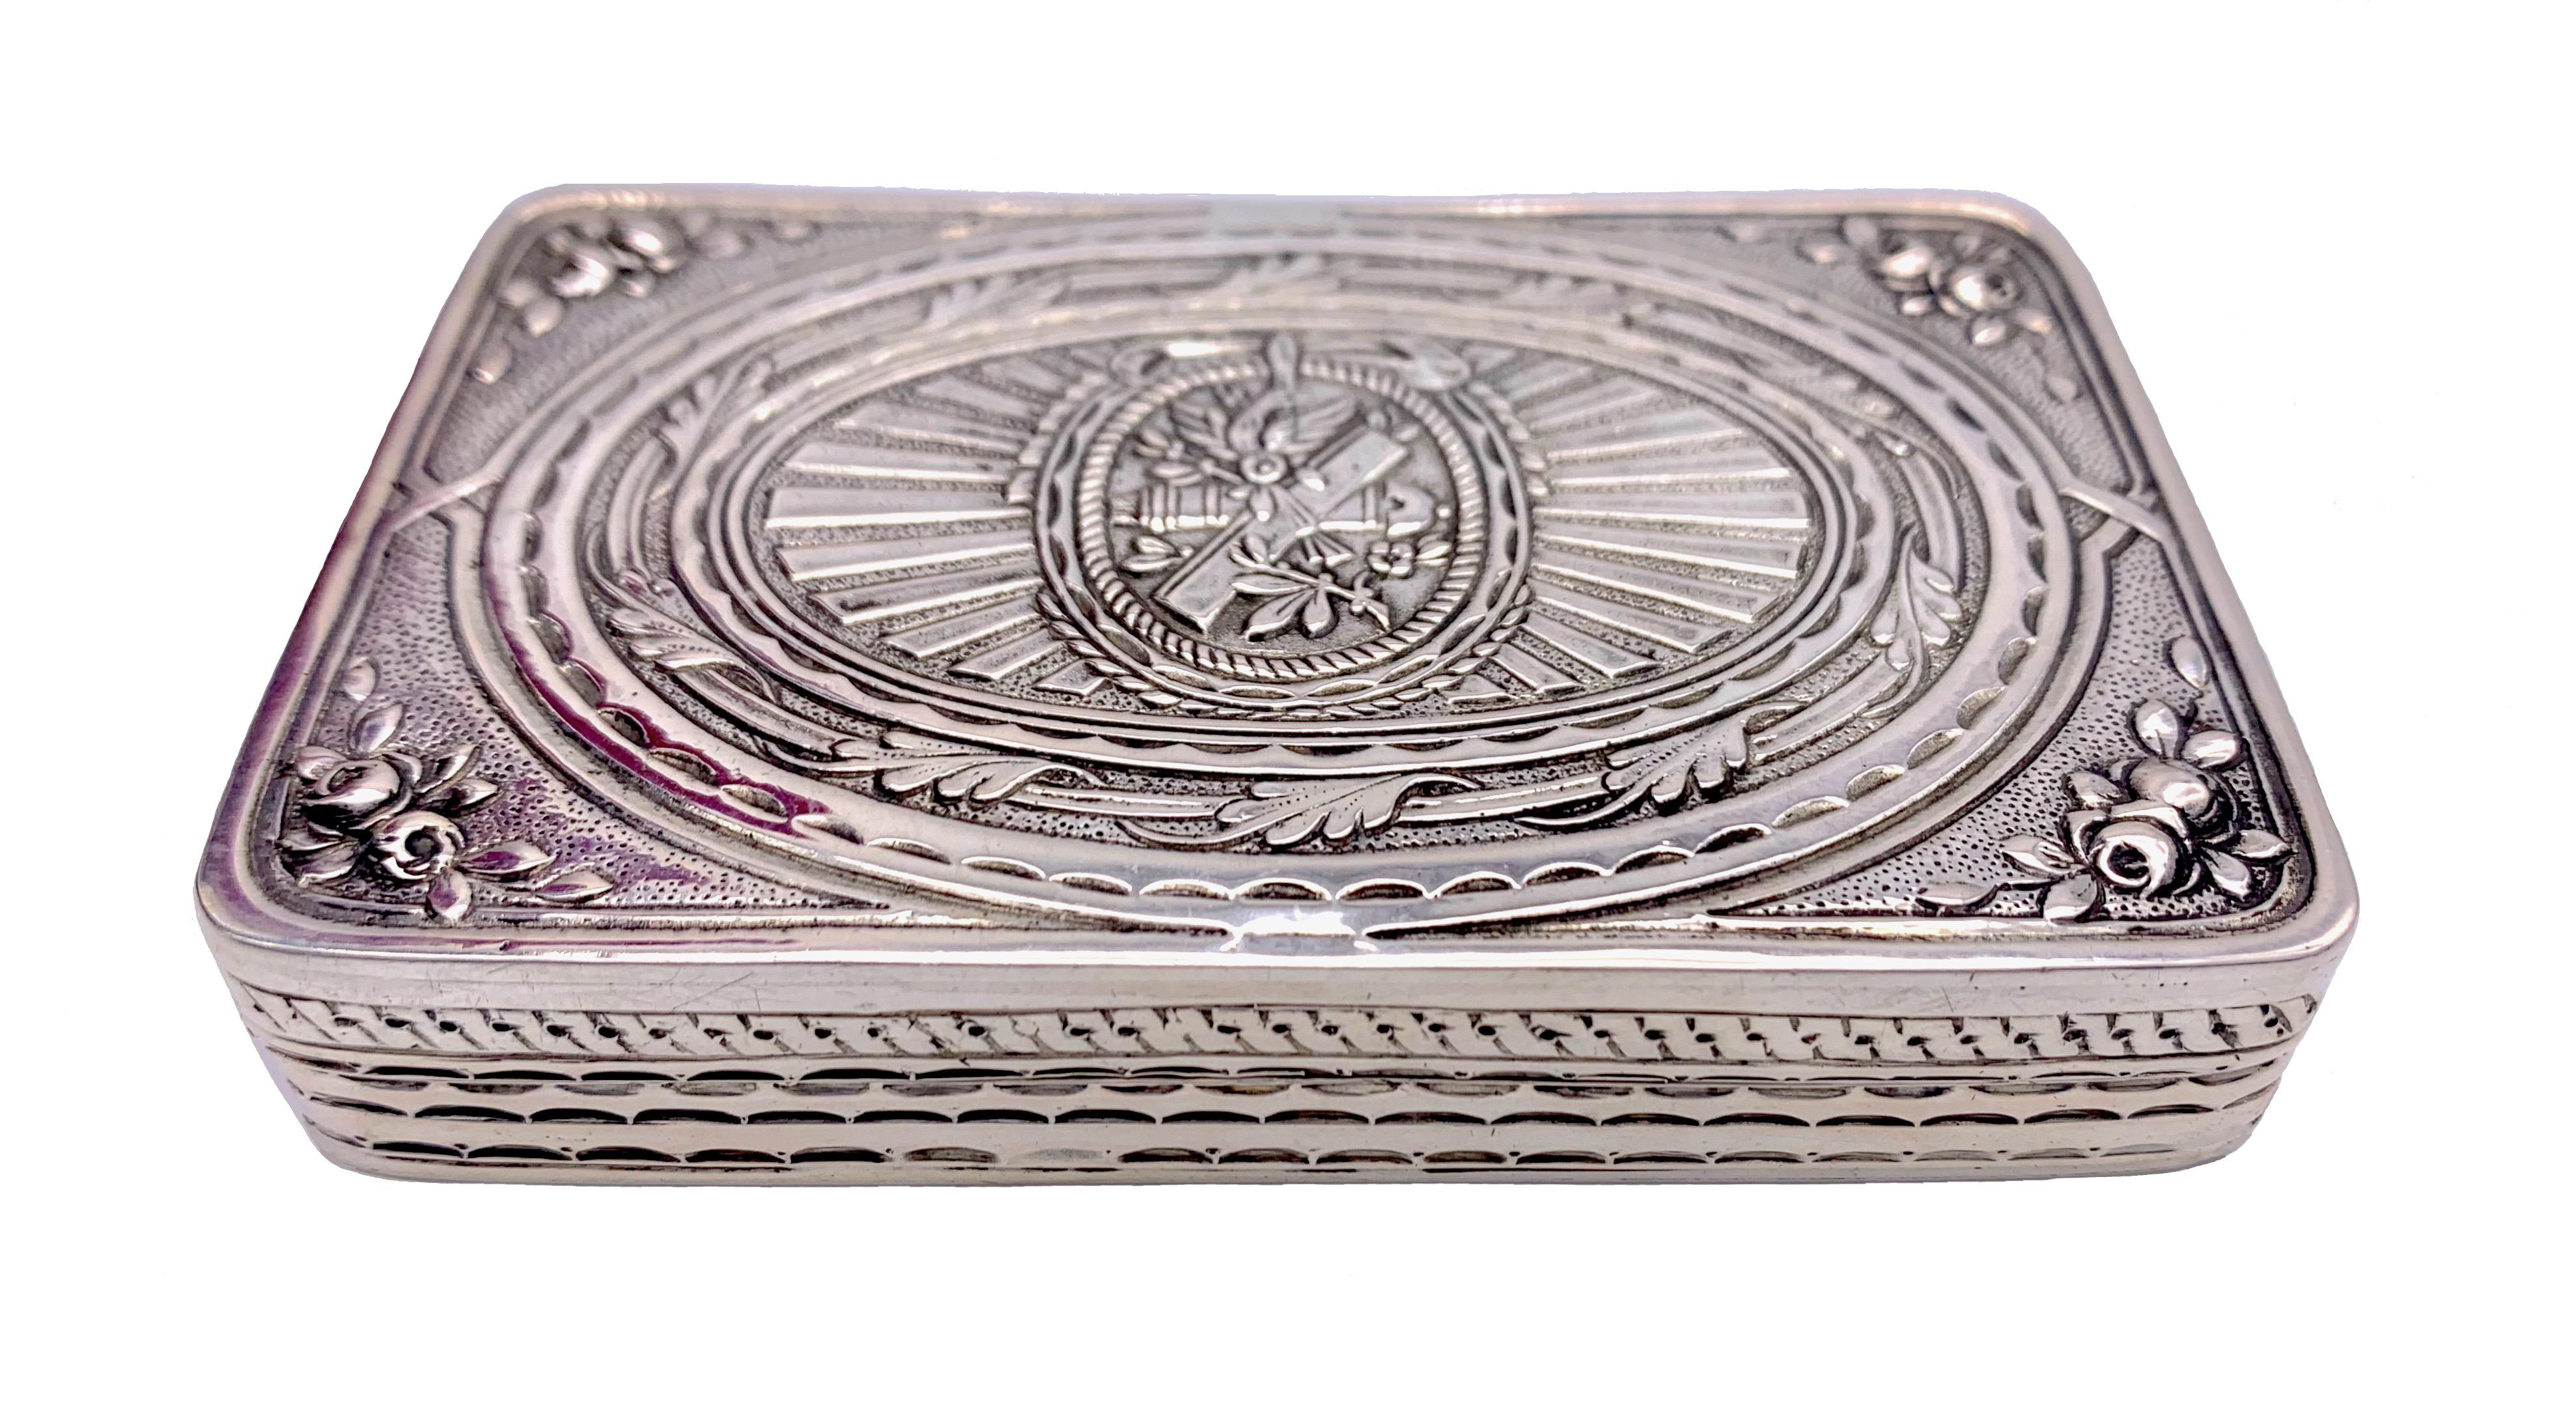  A charming silver box, heavily guilt on the inside is marked with German Kaiserreich crown and moon silver hallmark, maker's mark J, a Swan, K in an oval surround.
The lid and the sides of the box are decorated with finely chiseled  flowers and